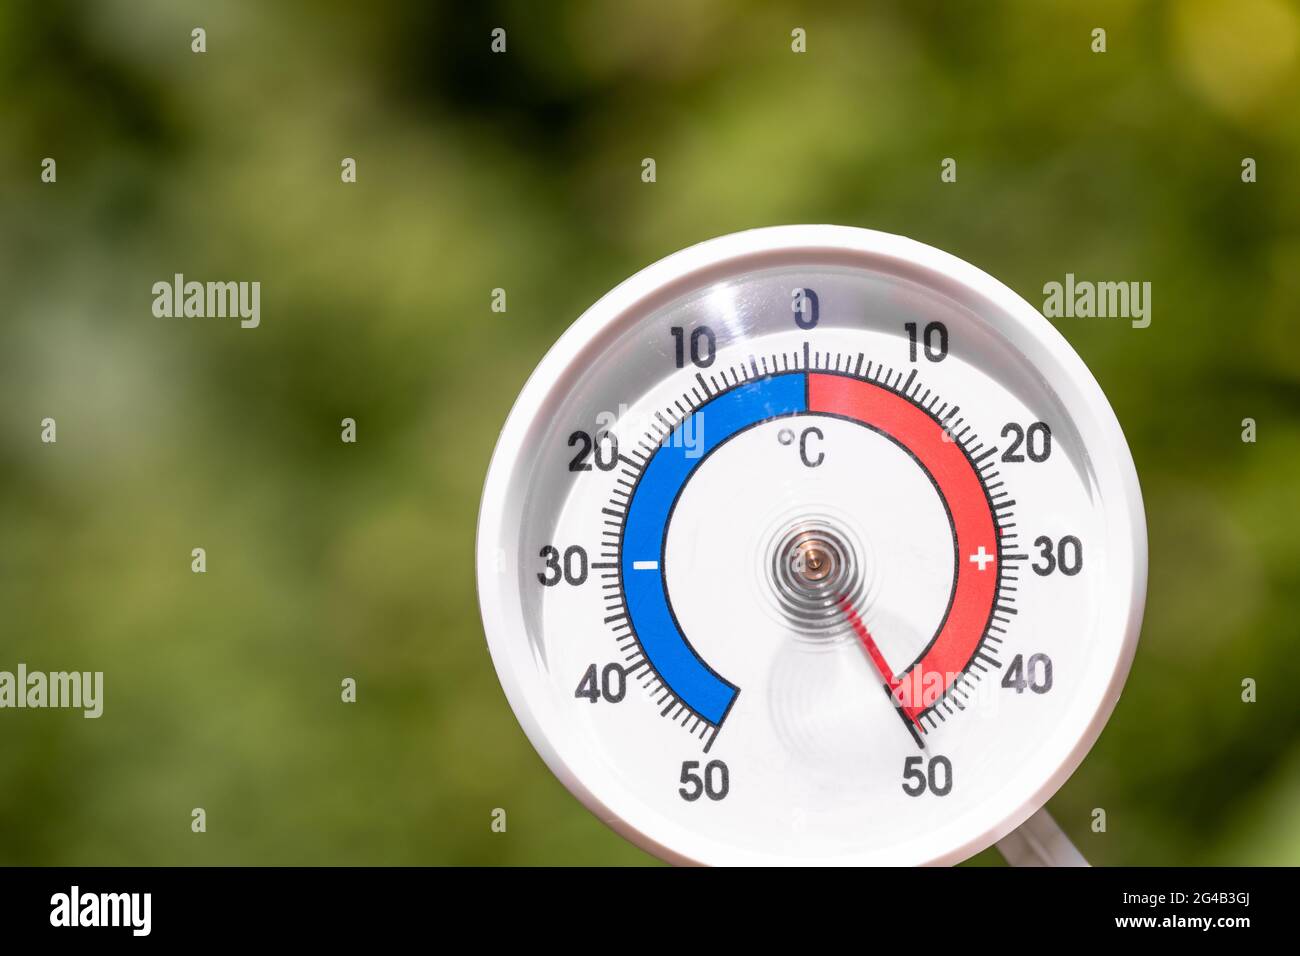 https://c8.alamy.com/comp/2G4B3GJ/outdoor-thermometer-with-celsius-scale-shows-extreme-hot-temperature-50-degree-summer-heatwave-concept-2G4B3GJ.jpg